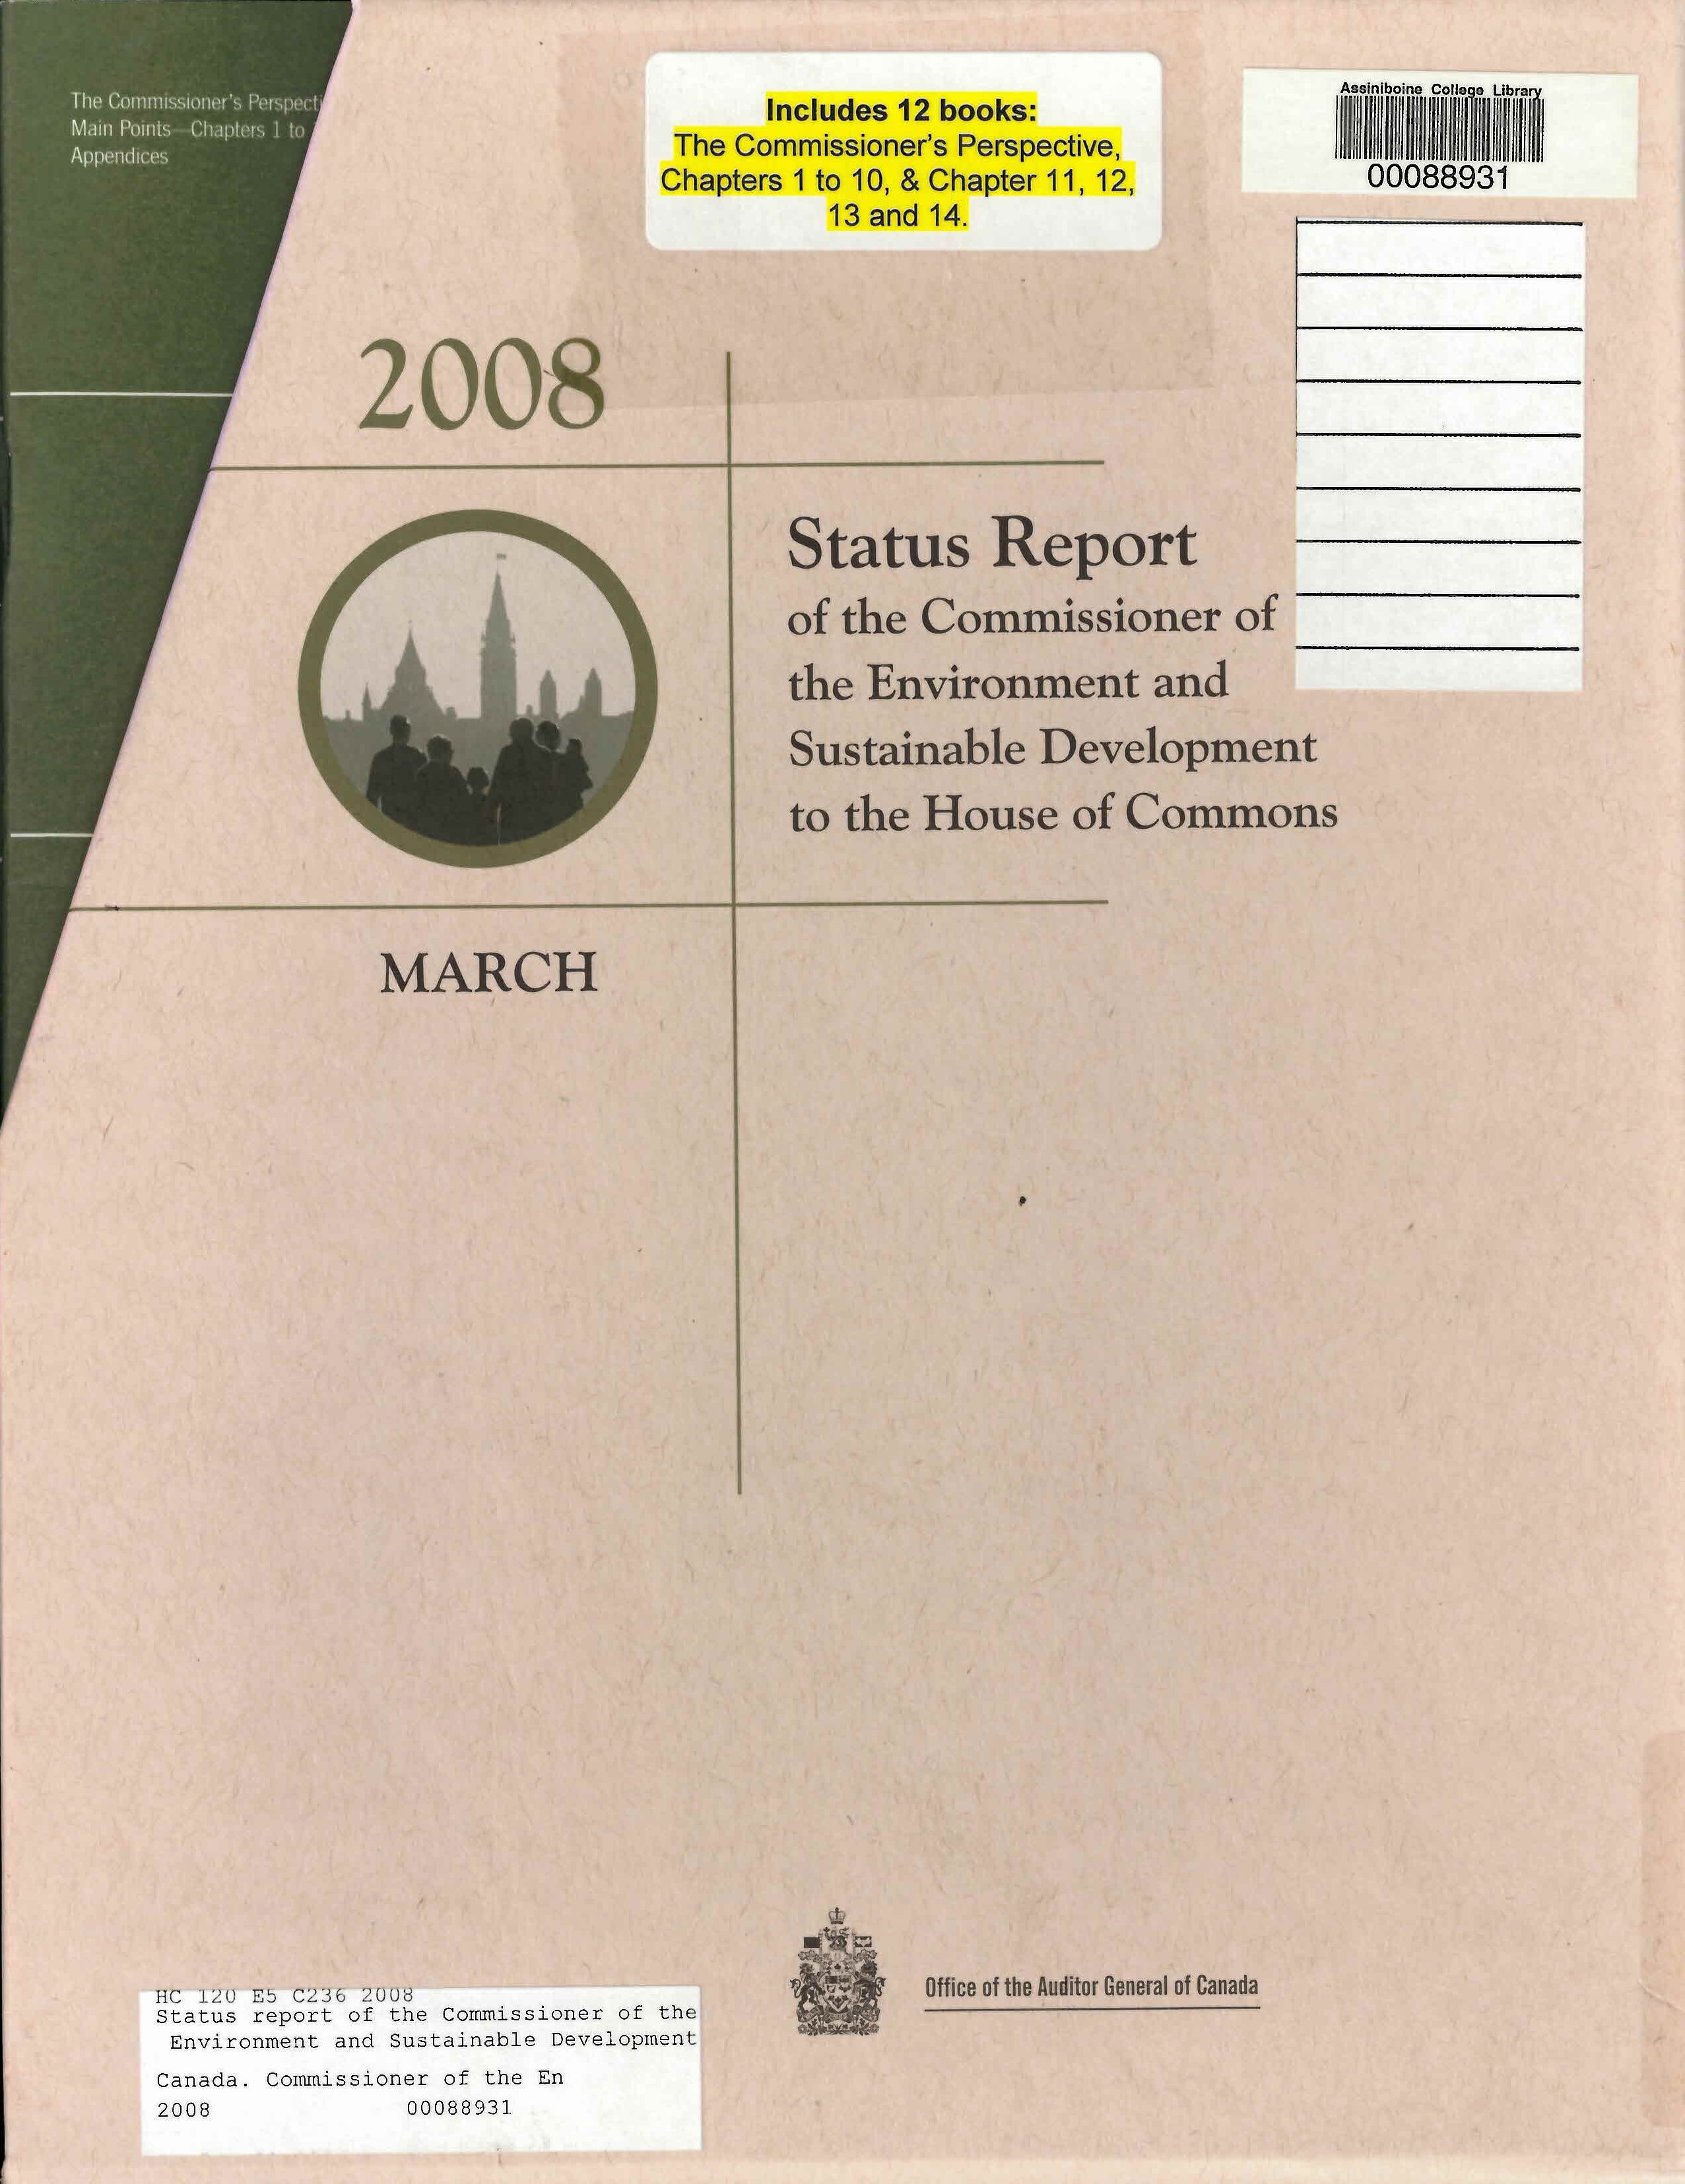 Status report of the Commissioner of the Environment and Sustainable Development to the House of Commons.